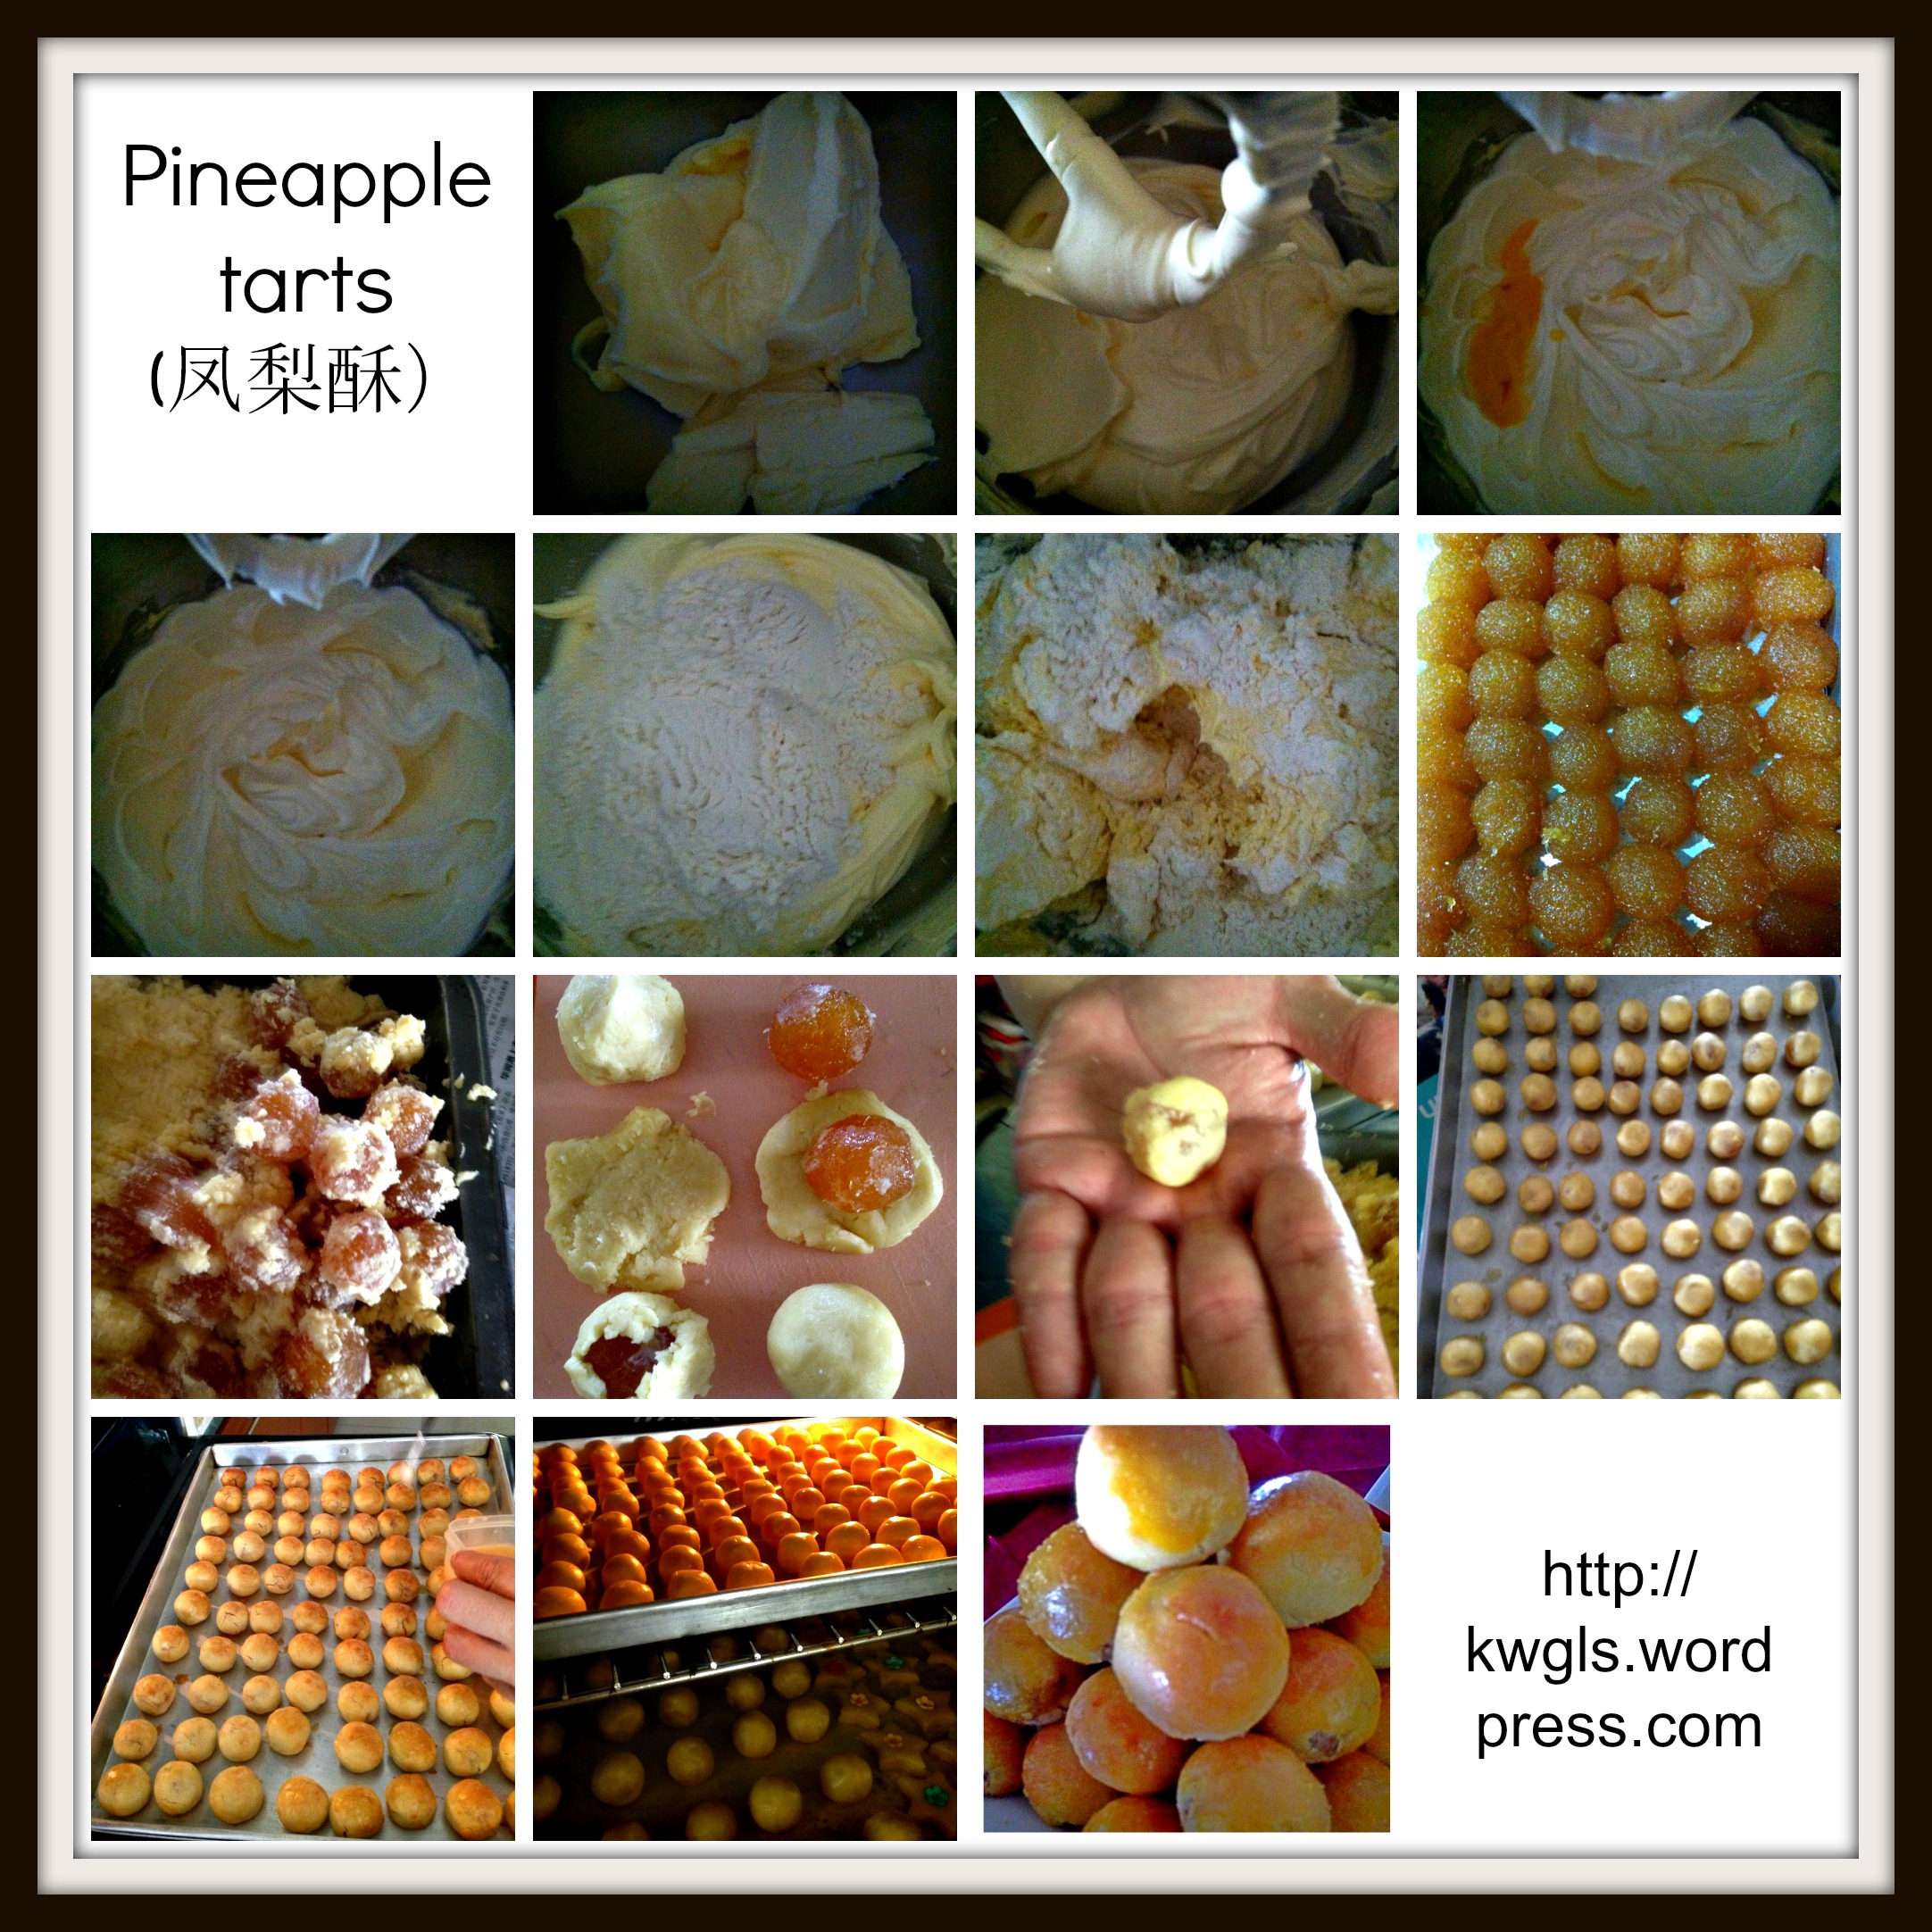 What A Golf Ball Have To Do With A Pineapple? Well, It Is The Famous South East Asian Pineapple Tarts (凤梨酥）